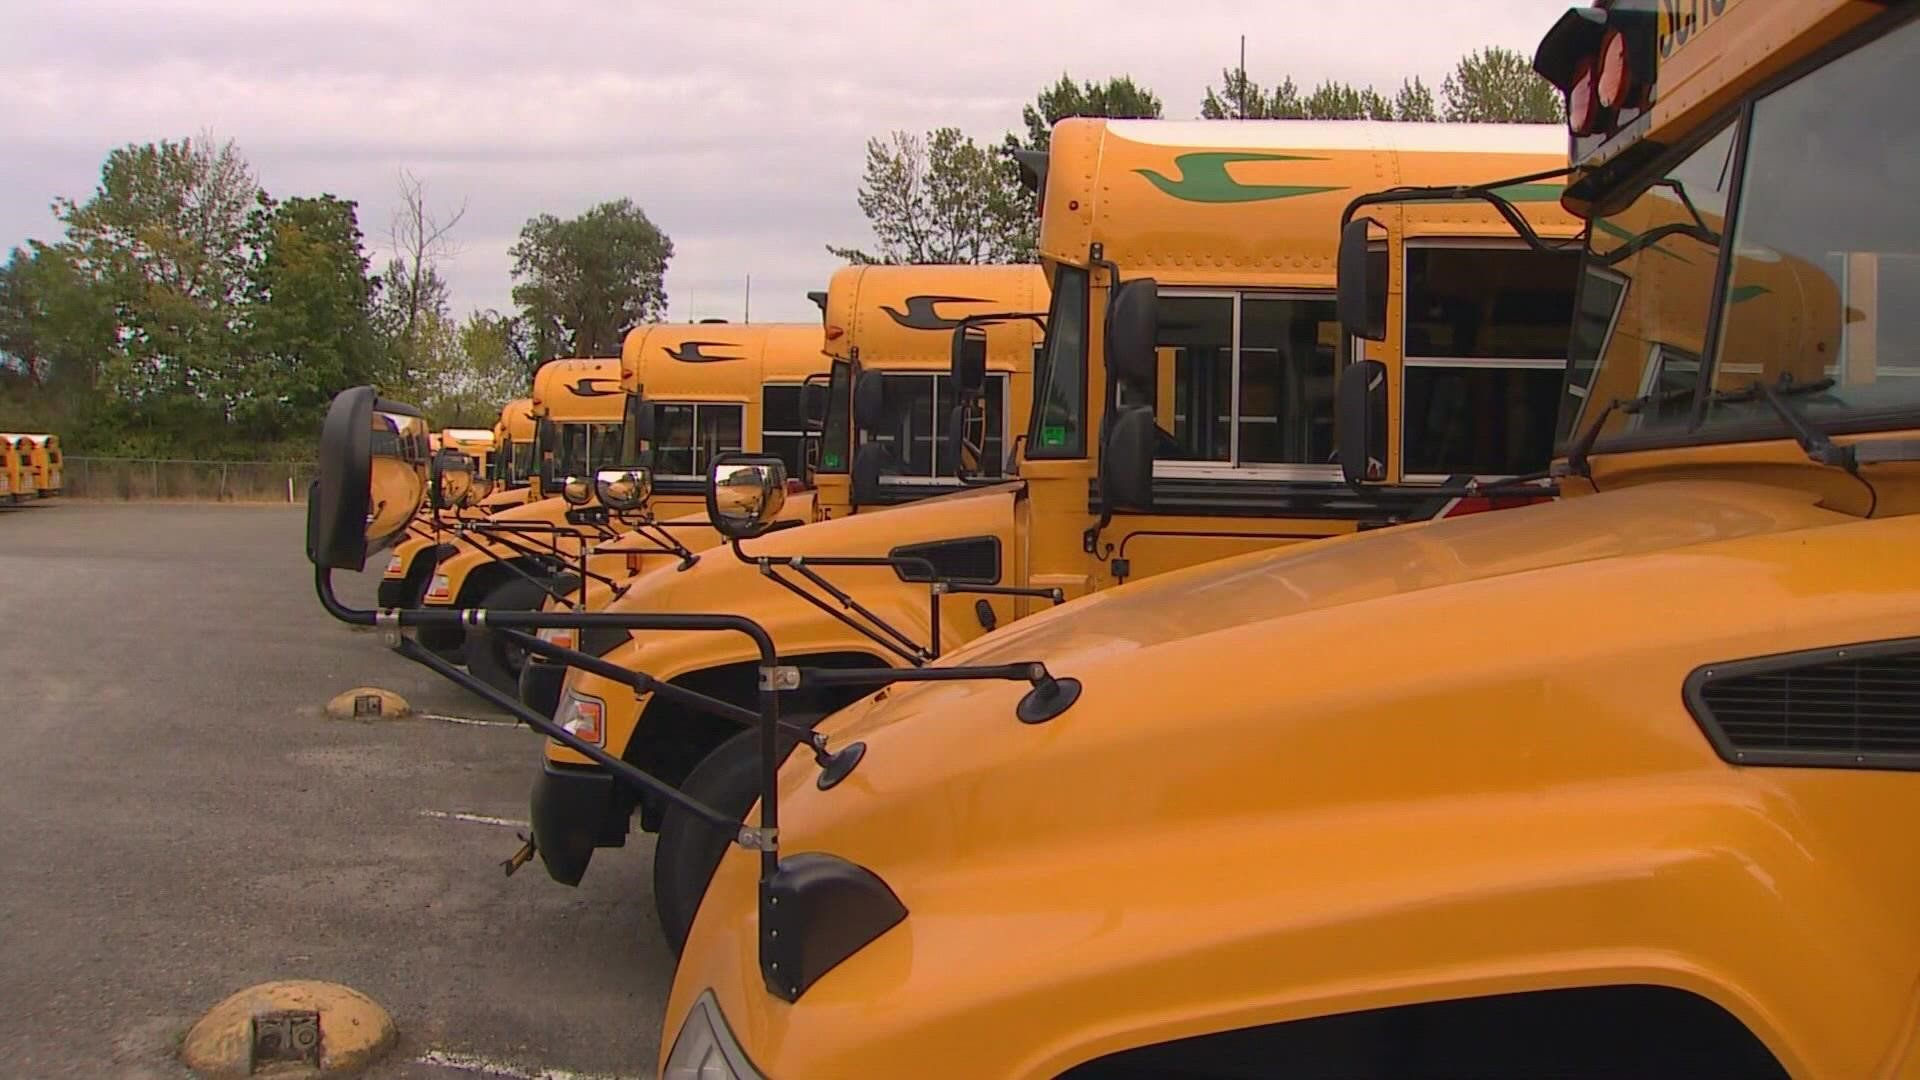 The Edmonds School District is anticipating losing between one and 22 bus drivers due to a state mandate that all education employees be vaccinated against COVID-19.